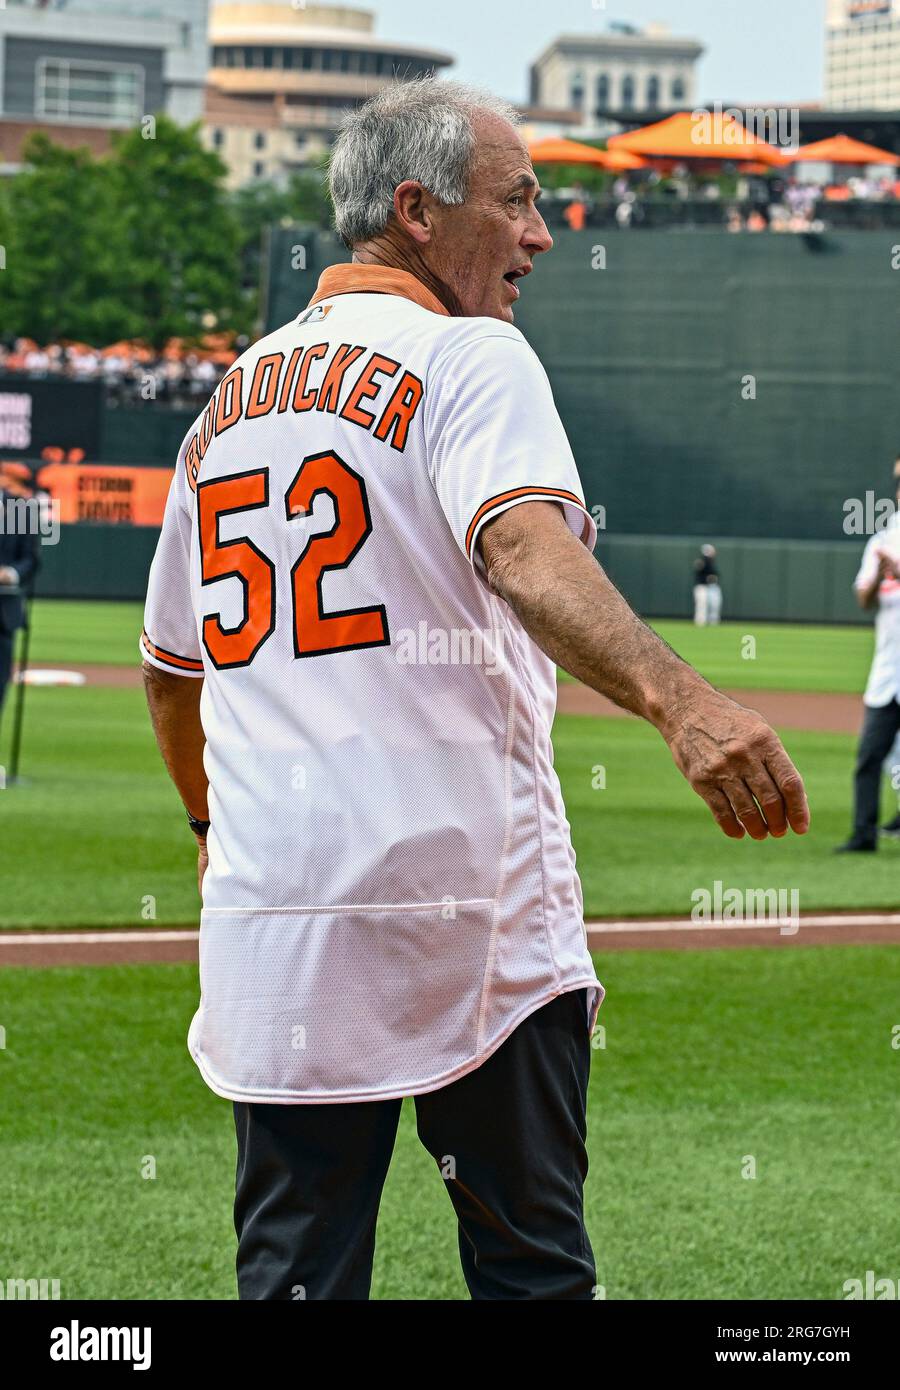 BALTIMORE, MD - August 5: Former Baltimore Orioles pitcher Mike Boddicker  (52) takes the field for a ceremony to honor the 1983 Orioles World Series  winning team prior to the New York